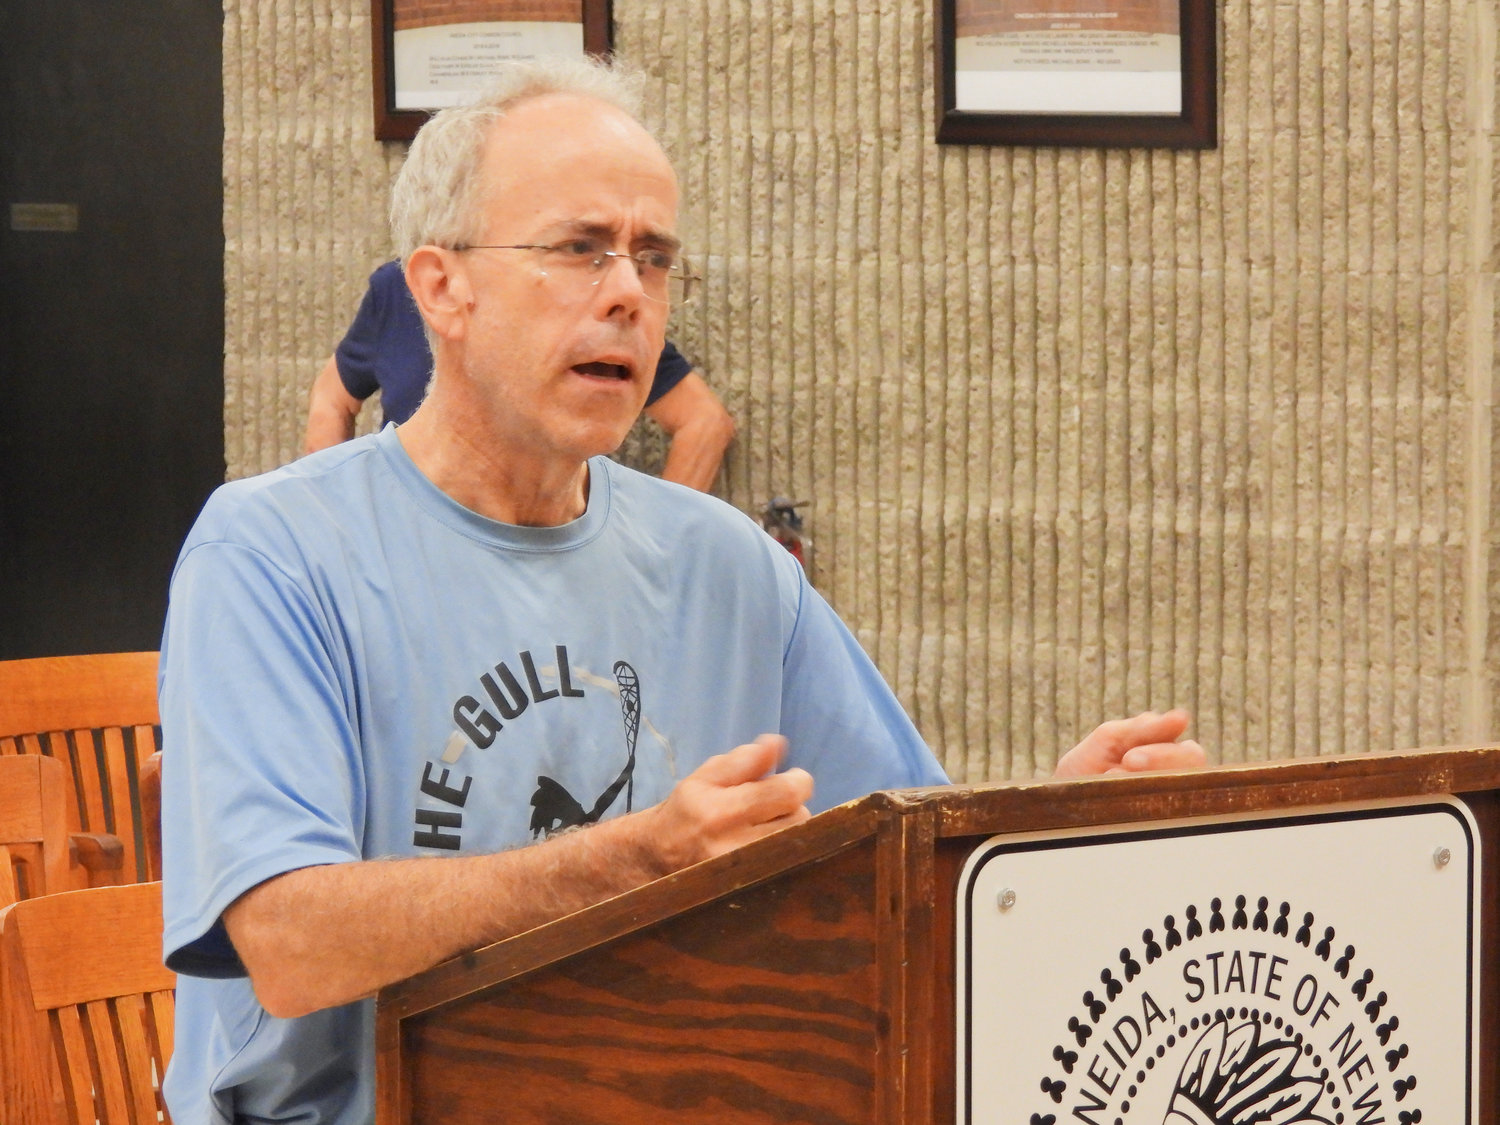 Oneida resident Ralph Kohler, a resident of Ward 1, speaks at Tuesday’s meeting and expressed displeasure at the council’s lack of communication to the city and its residents about the departure of Ward 1 Council Gary Reisman the days following his replacement.